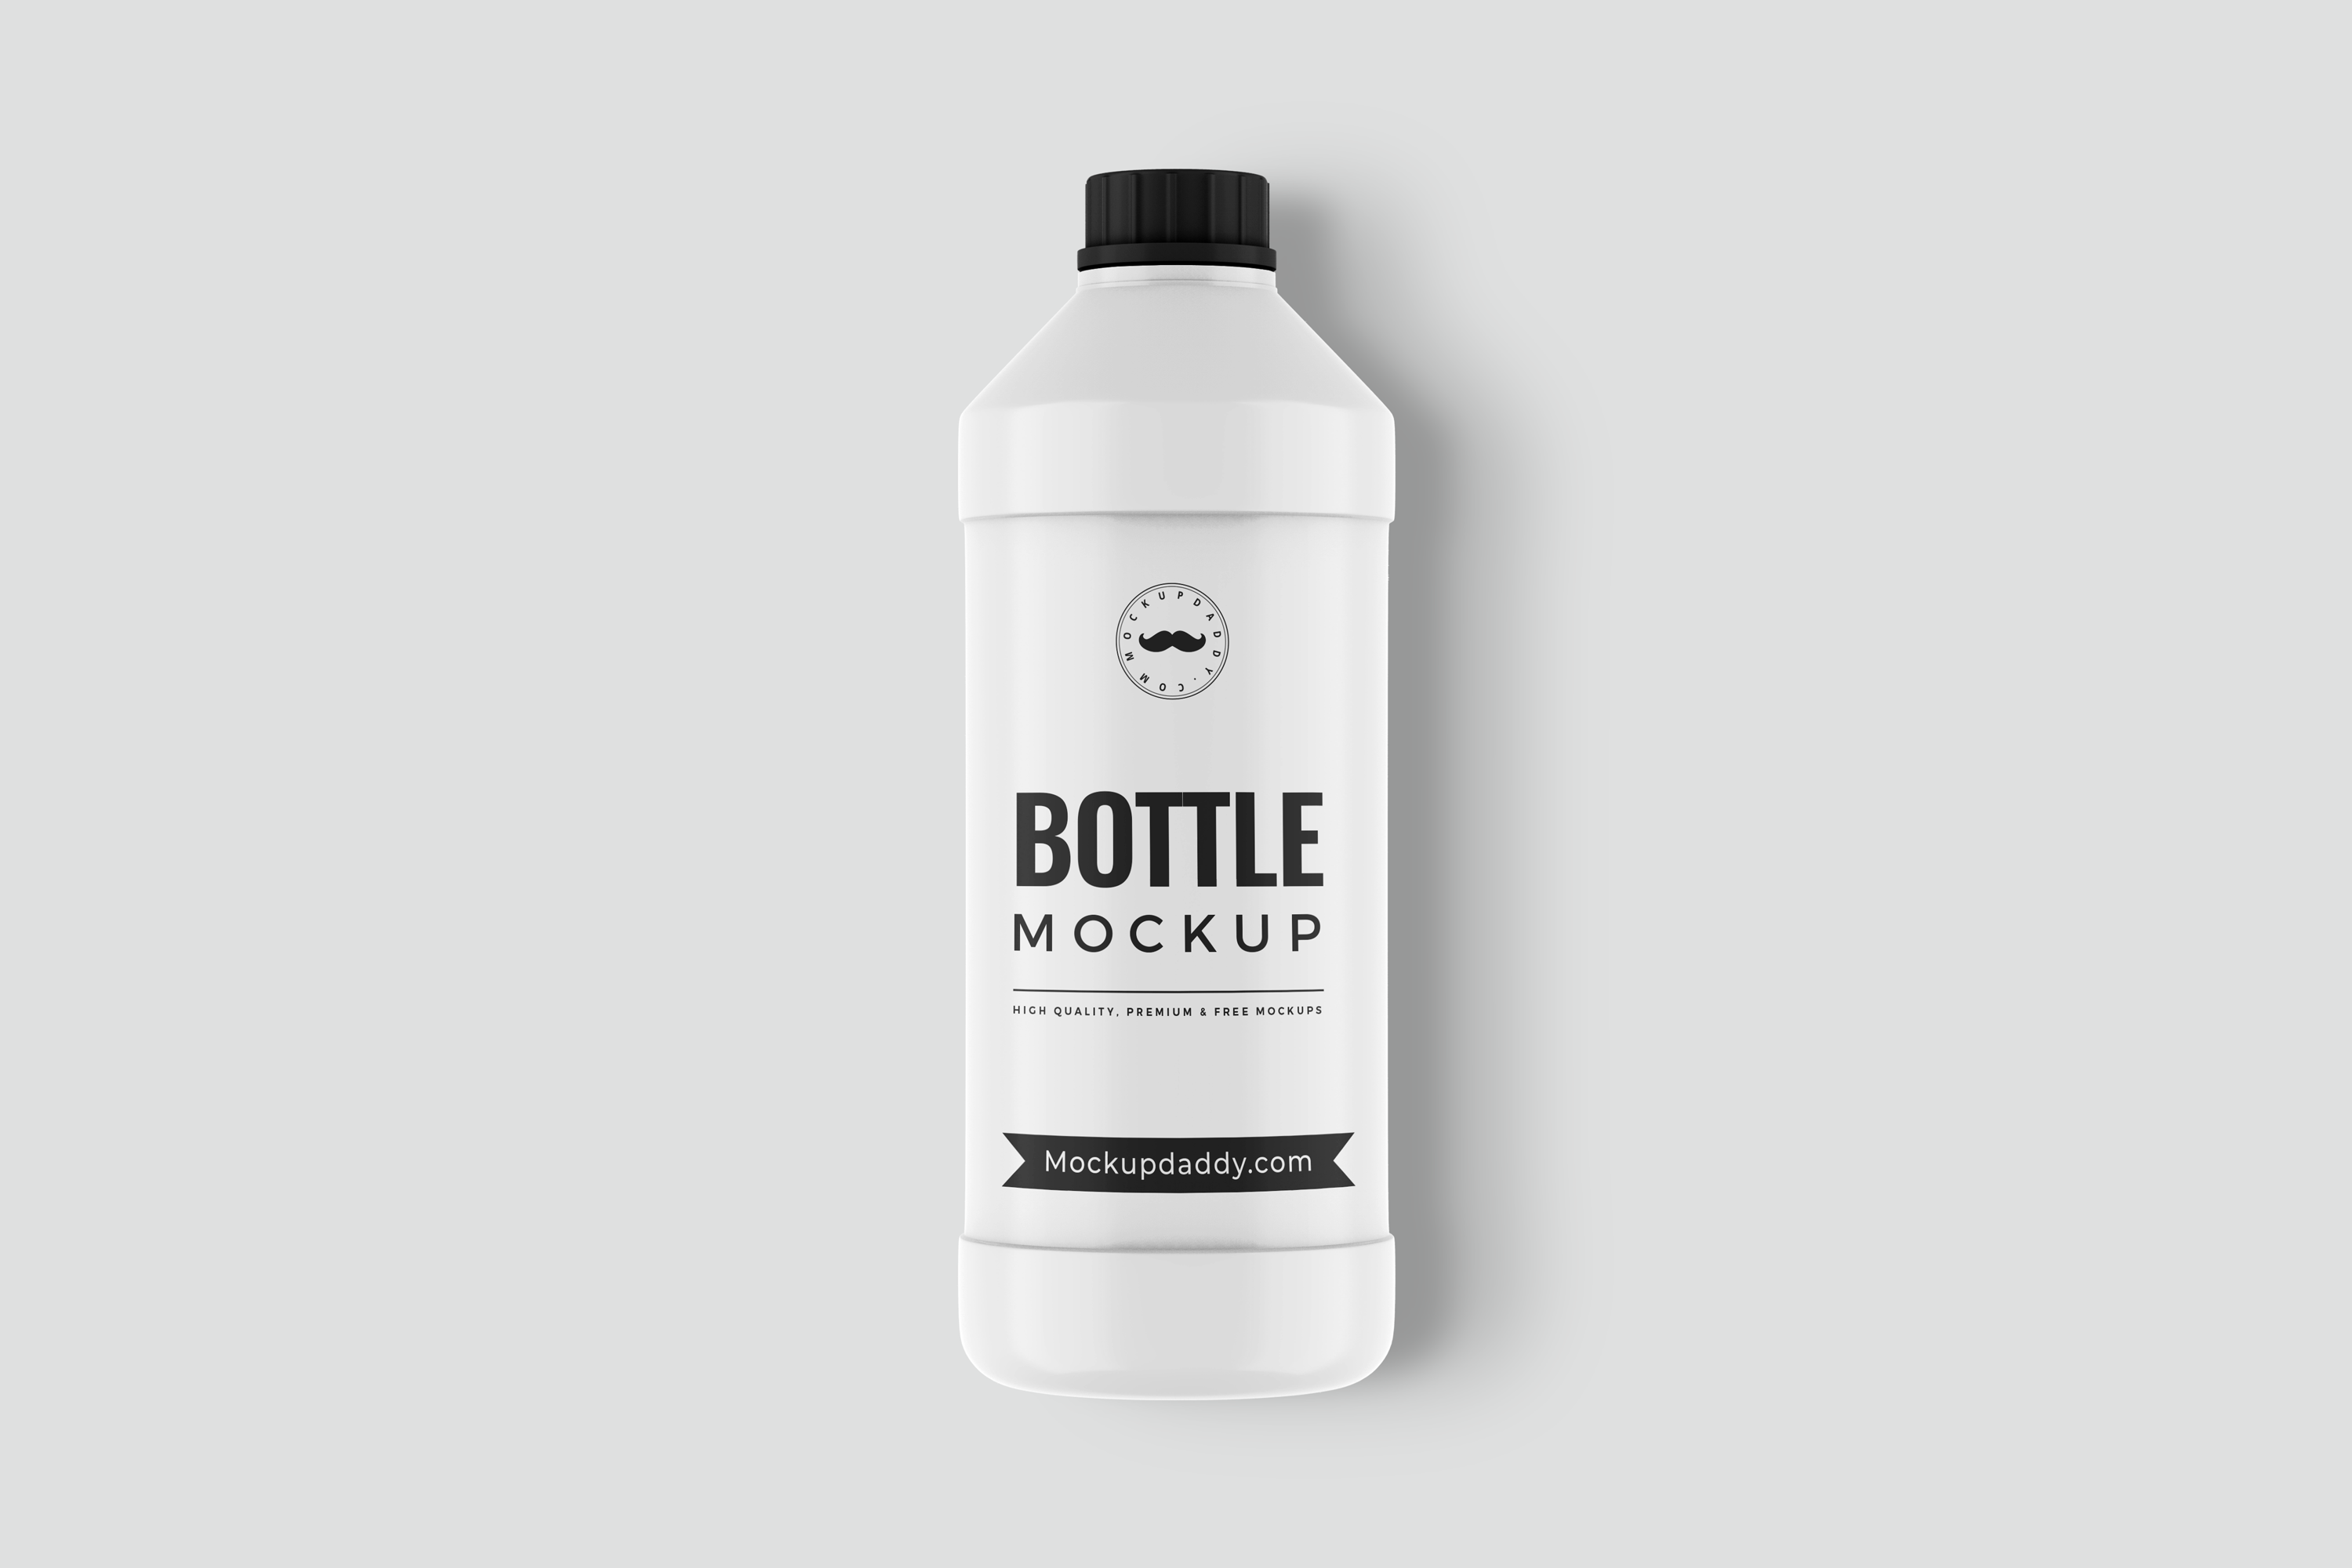  White detergent bottle packaging mockup with customizable label